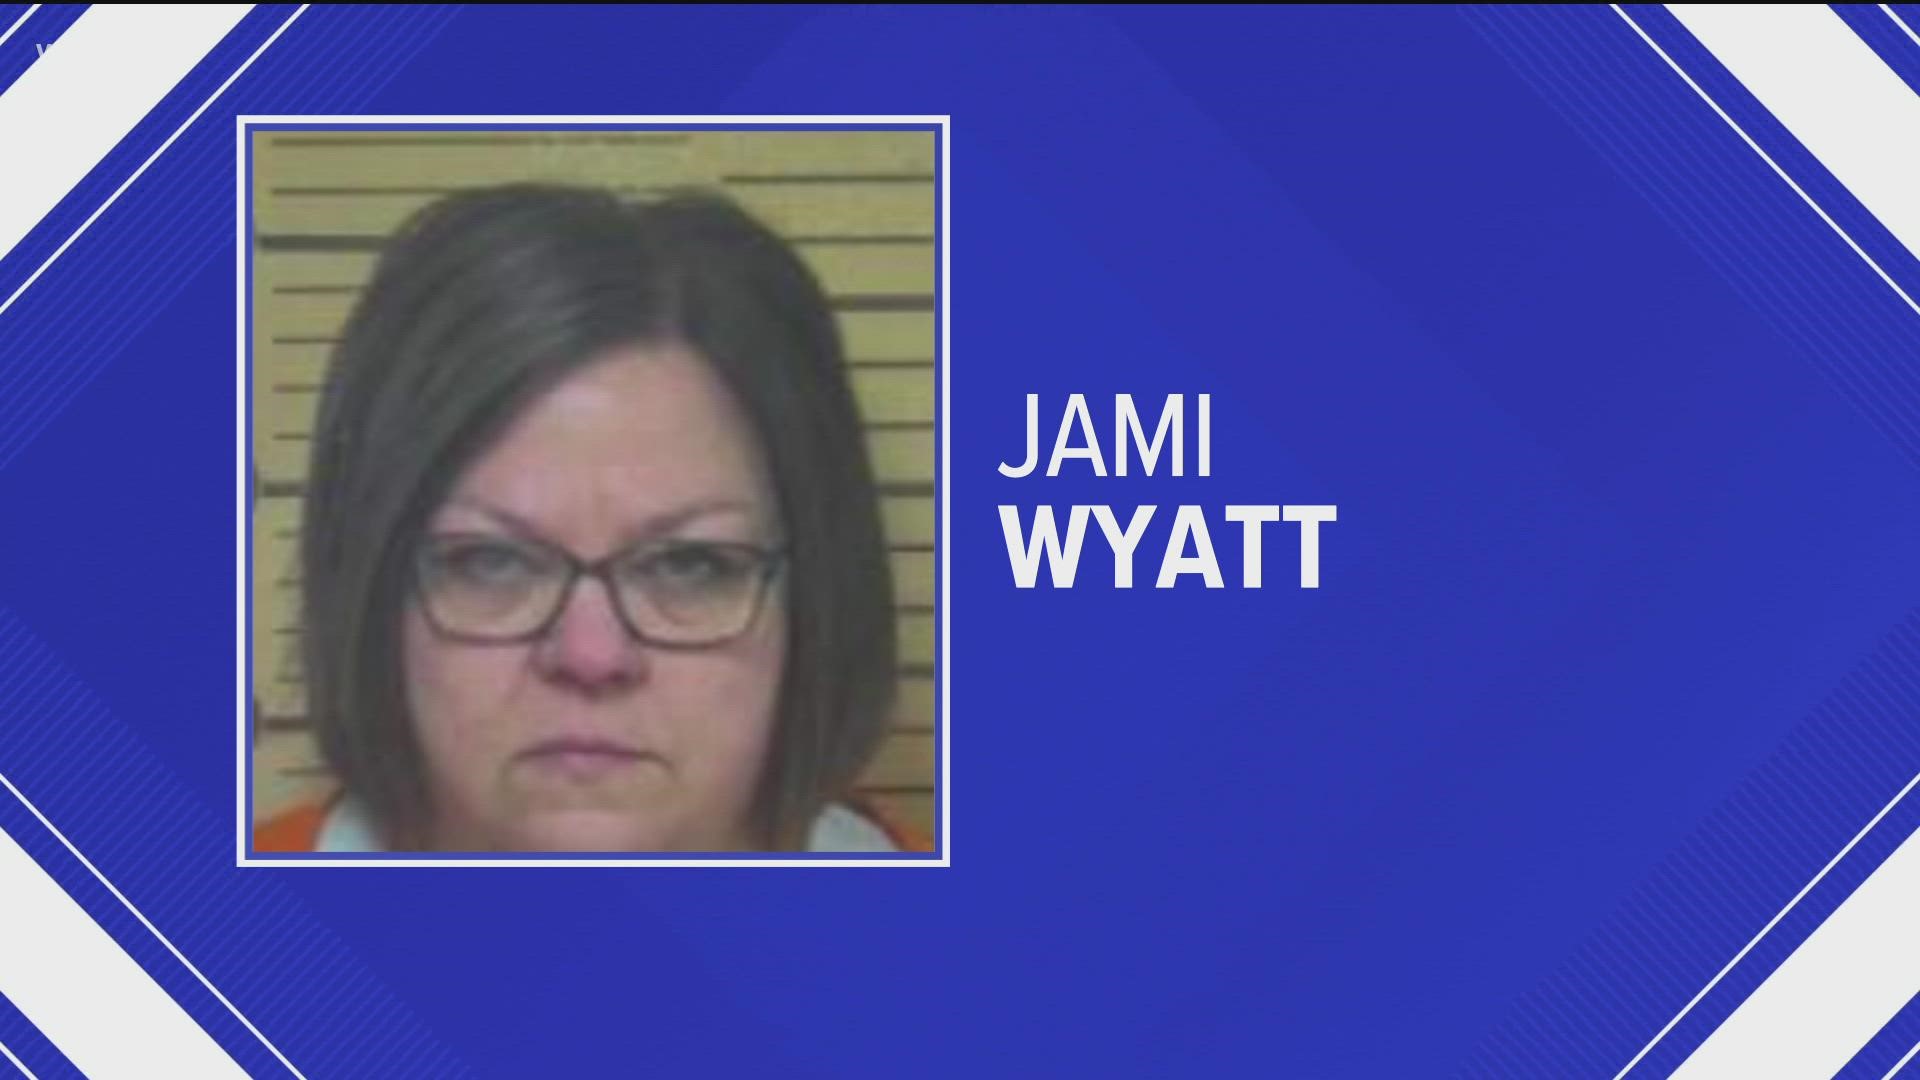 50-year-old Jami Wyatt is set to be arraigned Wednesday. Her husband, Douglas Wyatt, is facing over 30 charges including gross sexual imposition of a minor under 13.